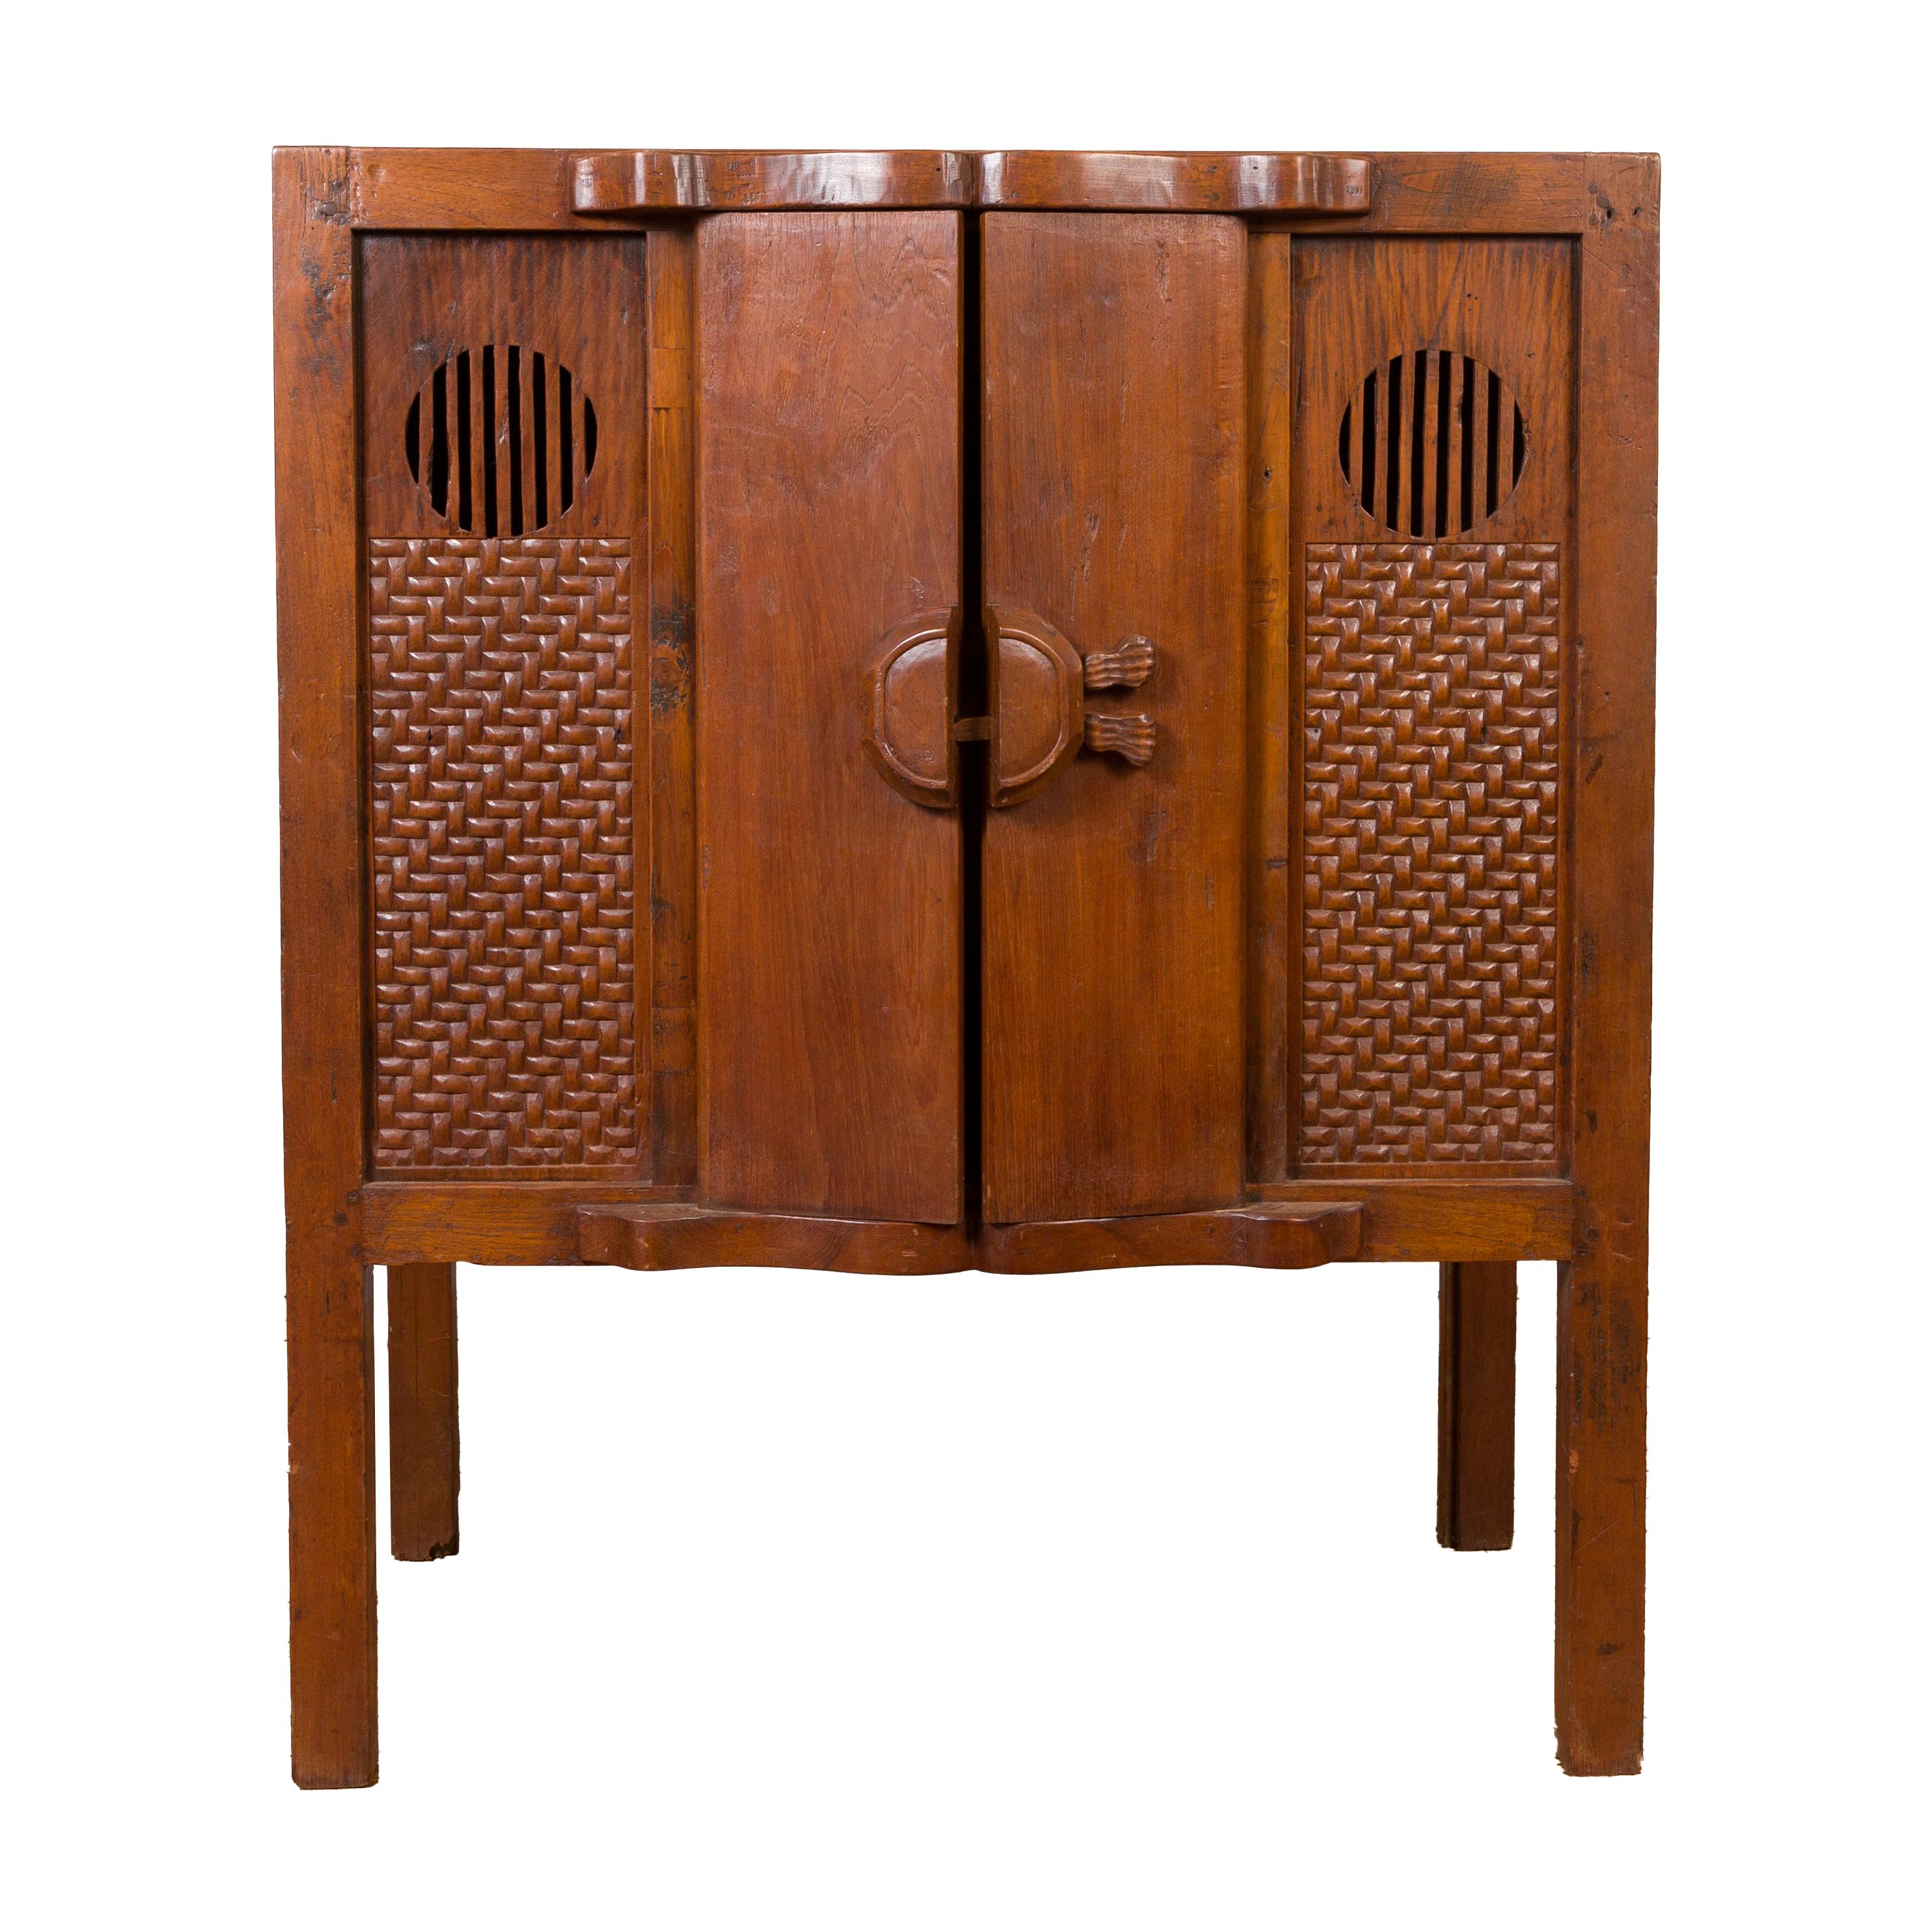 Chinese Vintage 1940s Wooden Cabinet with Two Doors and Carved Panels